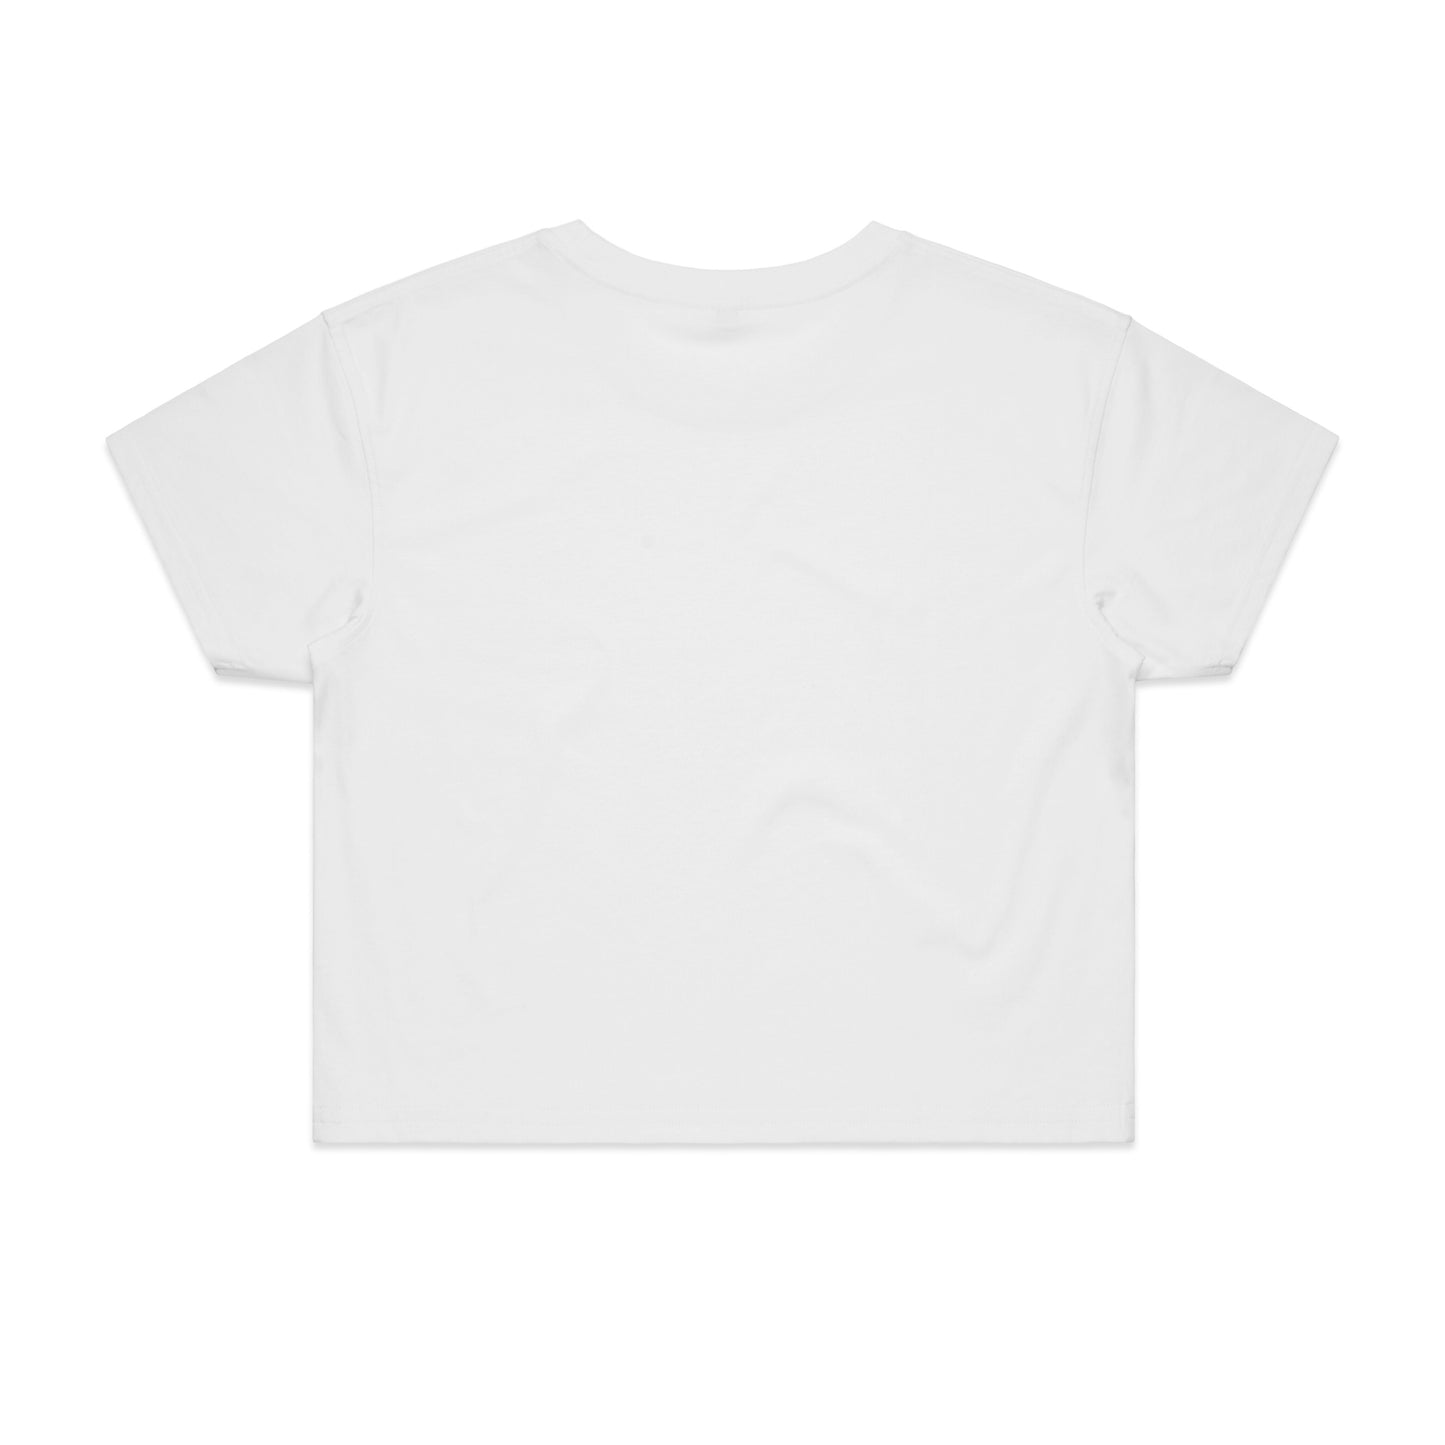 Forever logo - Crop top - White